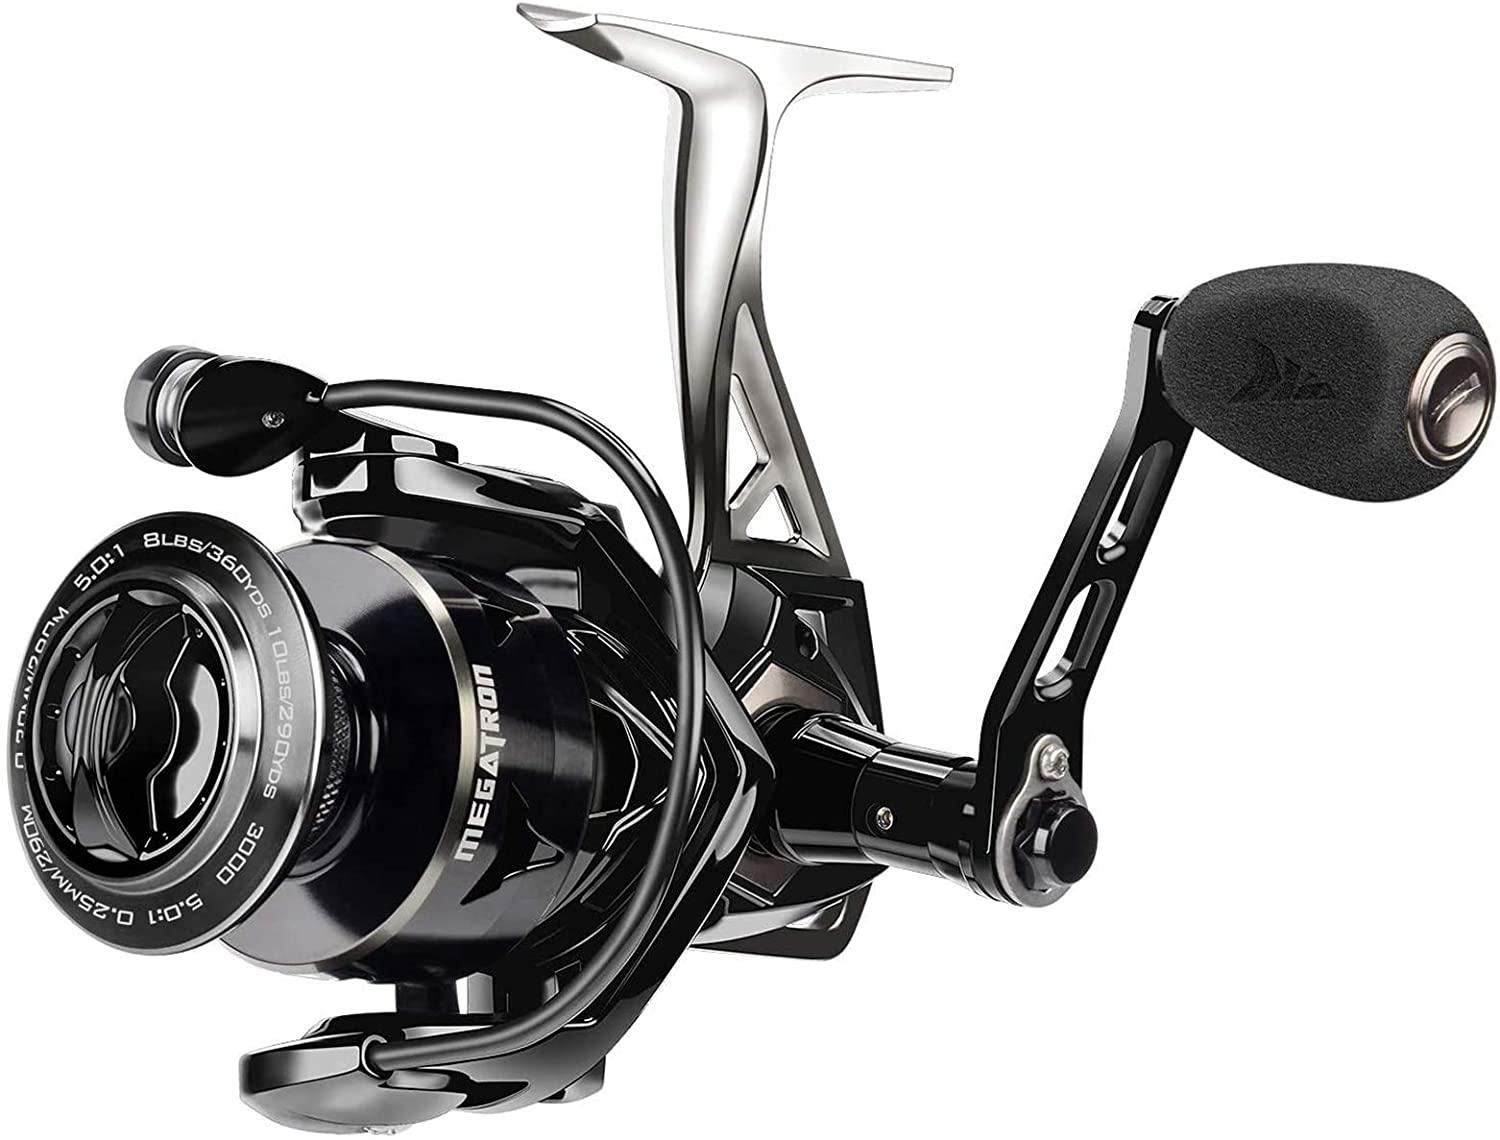 KastKing Megatron Spinning Reel, Freshwater and Saltwater Spinning Fishing  Reel, Rigid Aluminum Frame 7+1 Double-Shielded Stainless-Steel BB, Over 30  lbs. Carbon Drag, CNC Aluminum Spool & Handle 3000